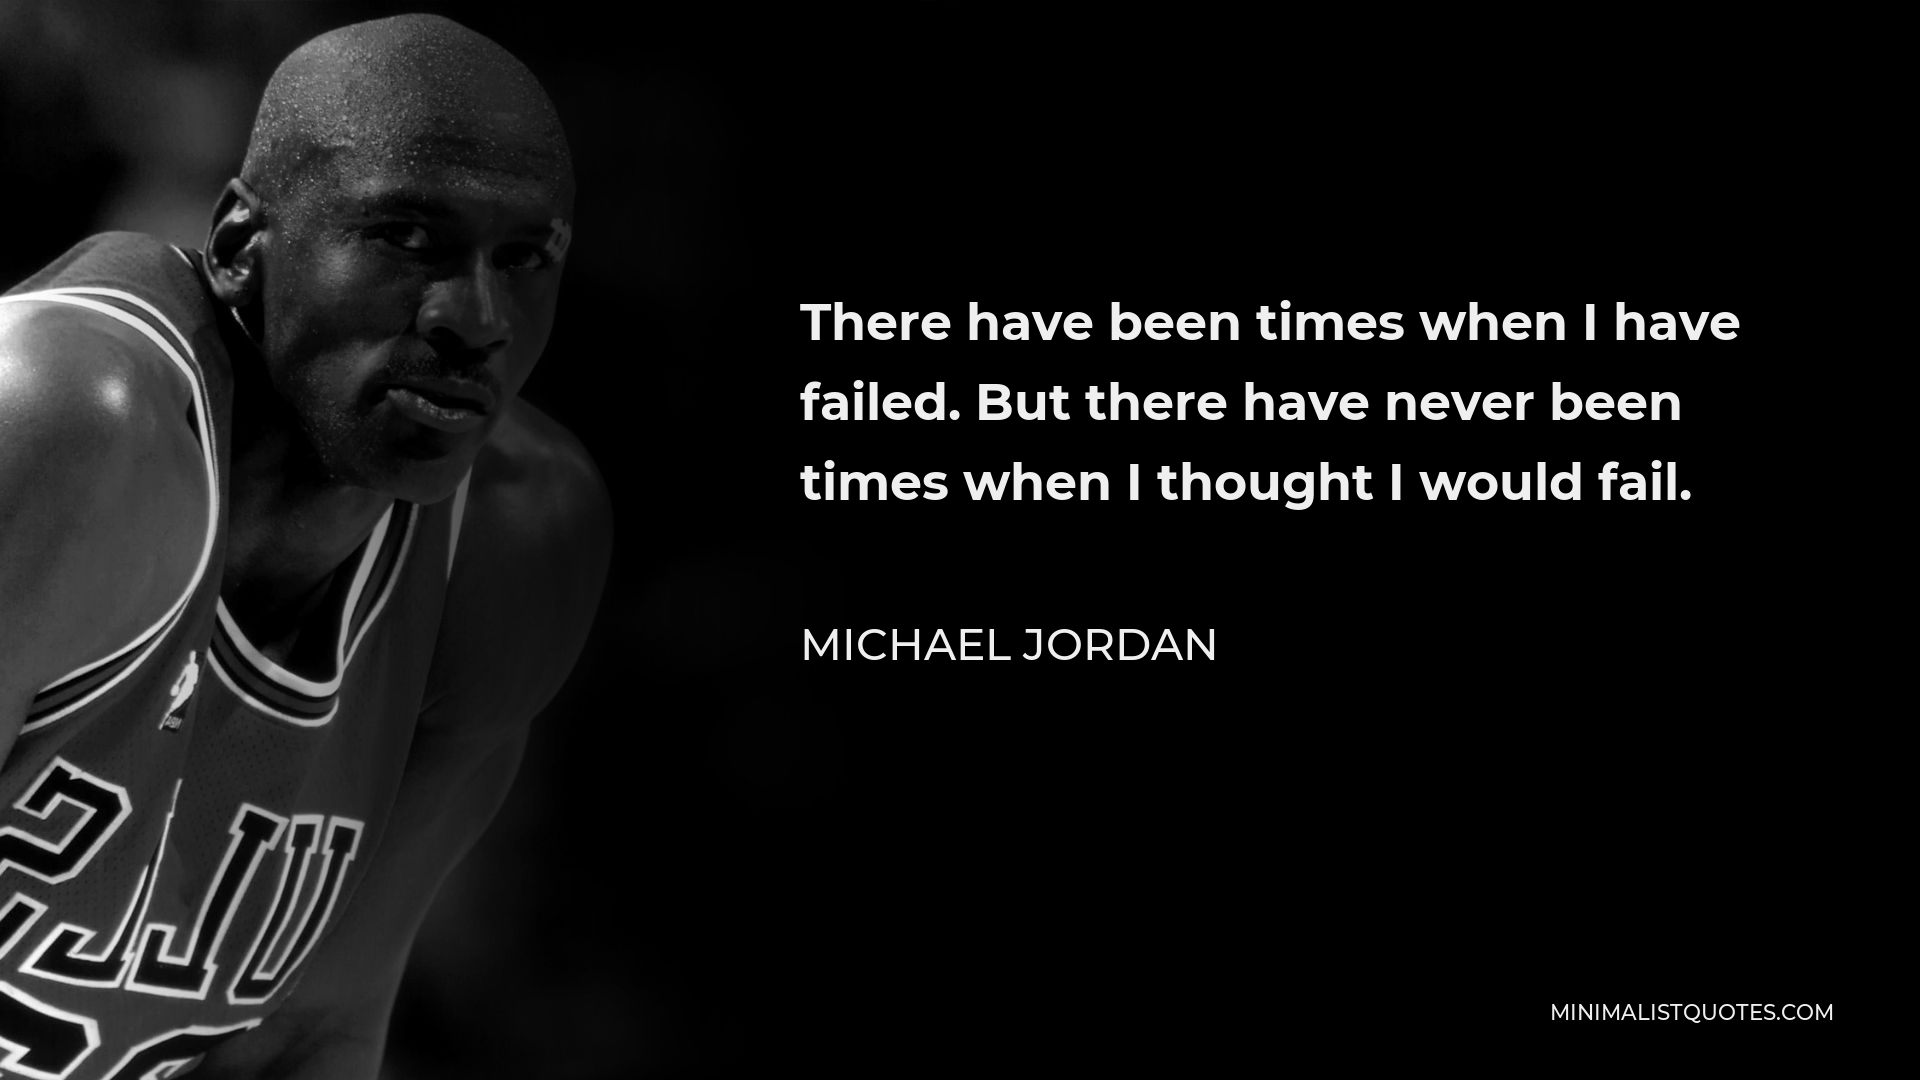 Michael Jordan Quote - There have been times when I have failed. But there have never been times when I thought I would fail.